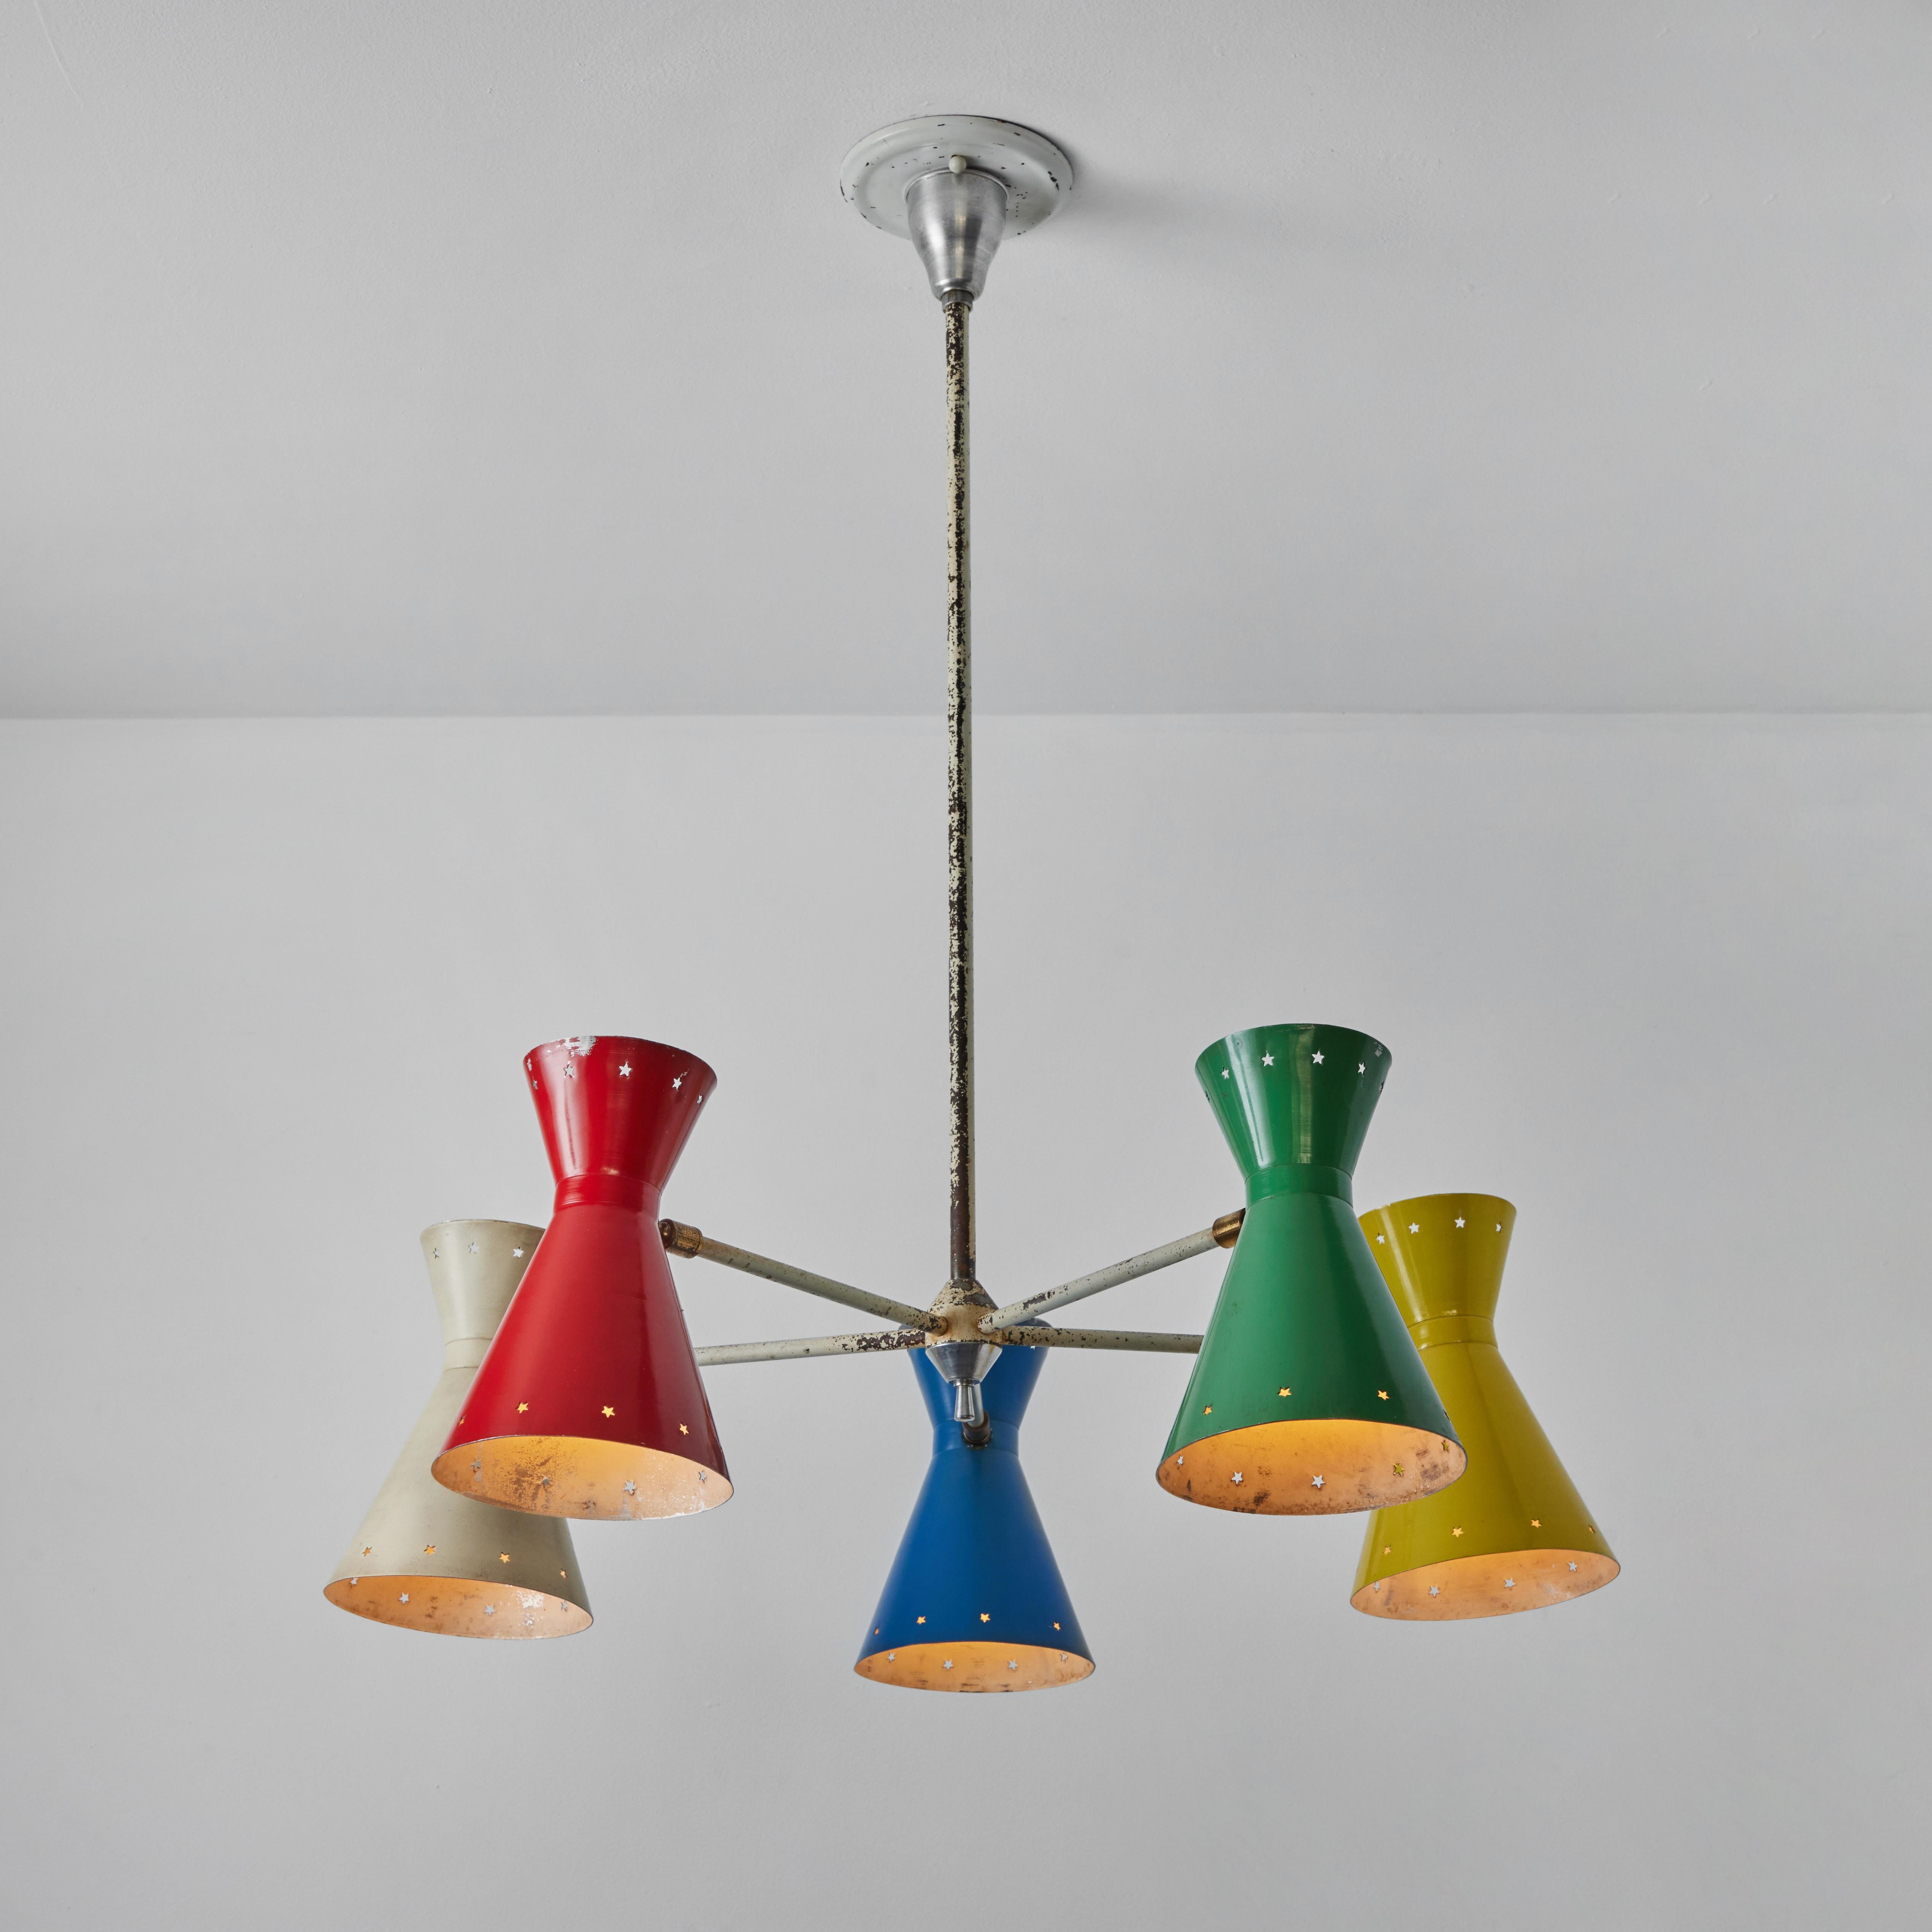 Rare 1950s Robert Mathieu 5-Shade Multi Color Chandelier In Good Condition For Sale In Glendale, CA